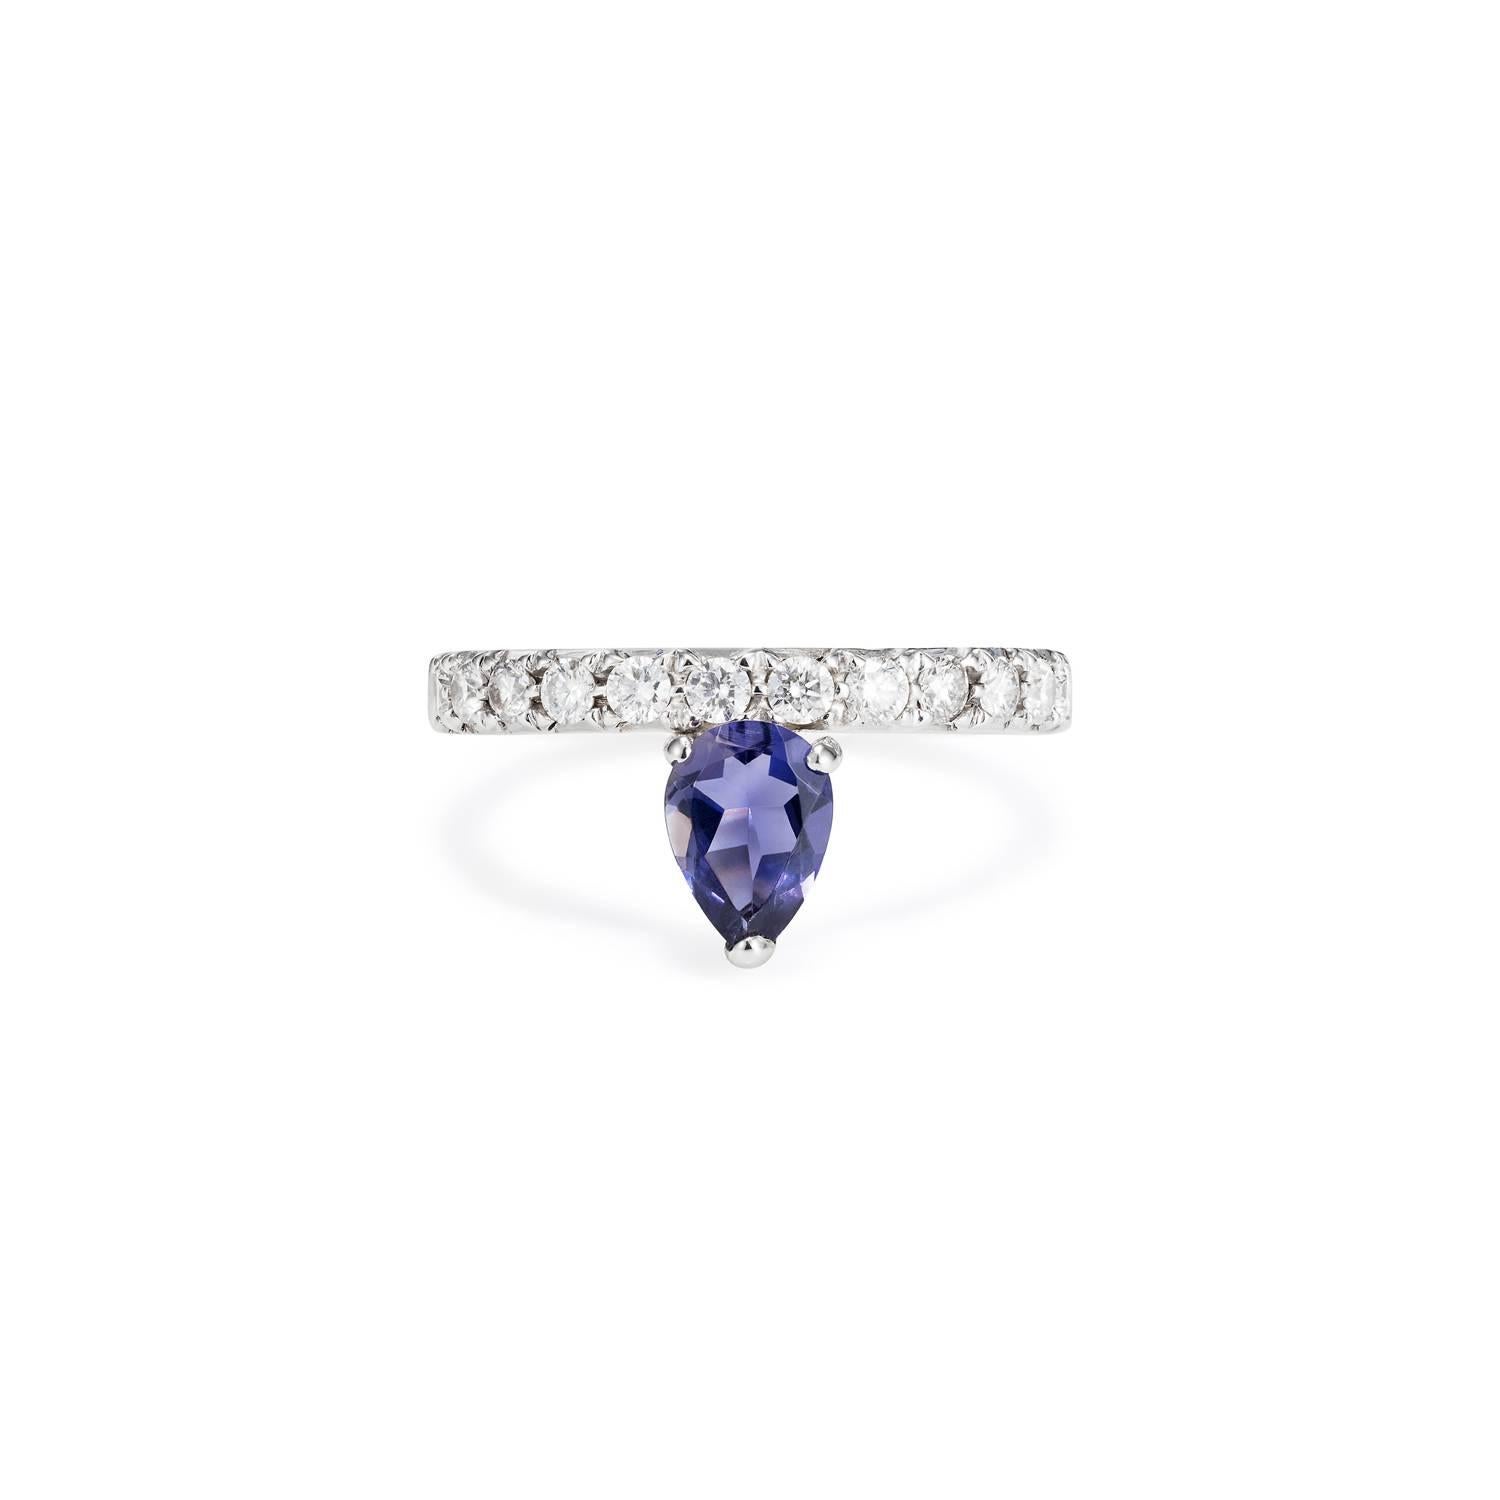 This DUBINI ring from the 'Theodora' collection features an iolite drop with diamonds set in 18K white gold. 

Ring size available: 53 (US 6.5)

The ring may be ordered in any size with a lead time of 2-3 weeks.

Please note that we offer a bespoke